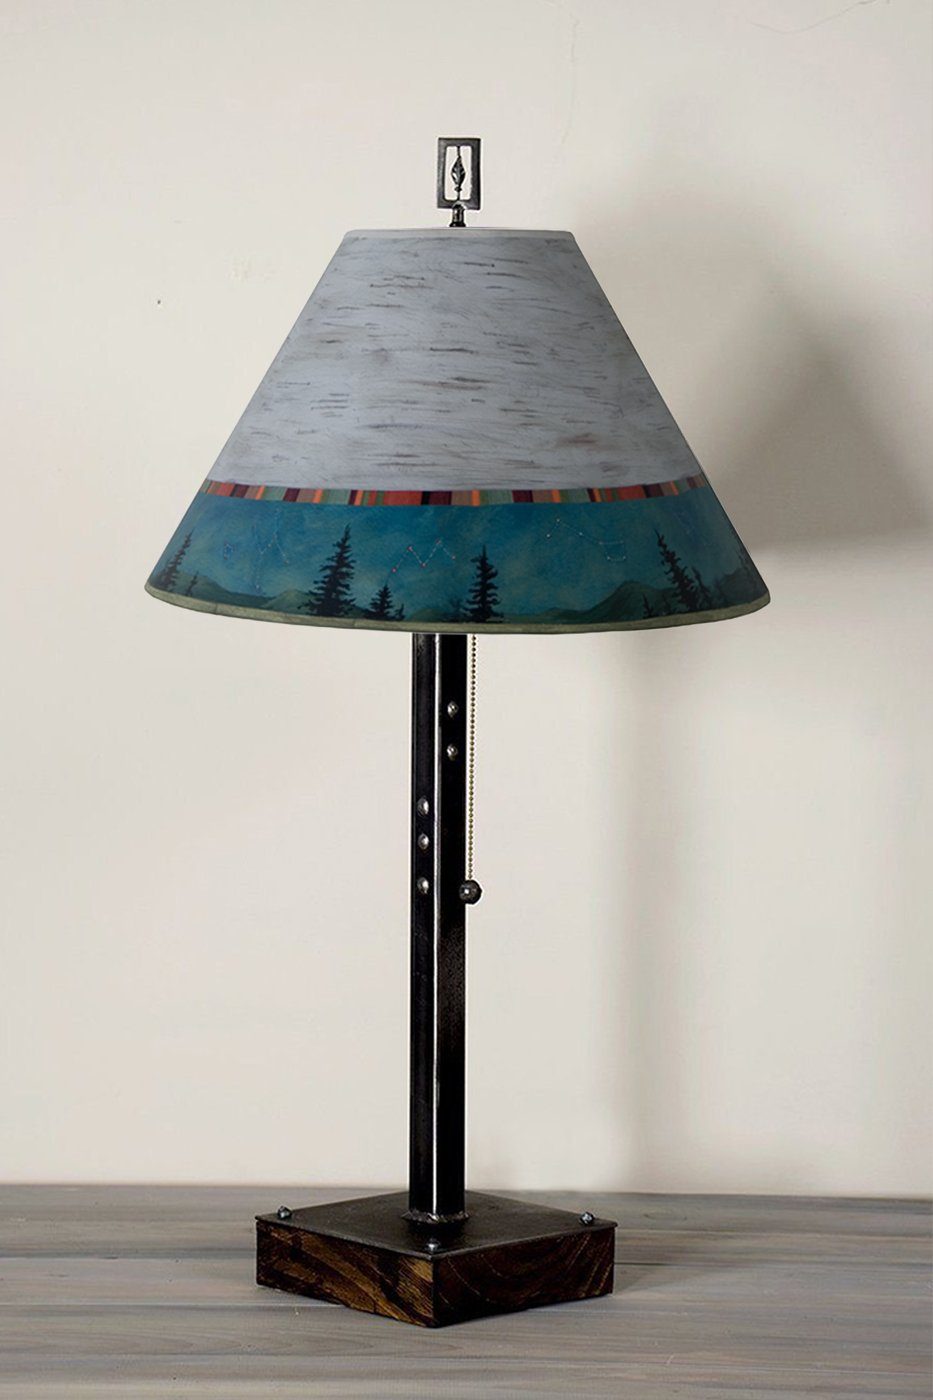 Steel Table Lamp on Wood with Medium Conical Shade in Birch Midnight